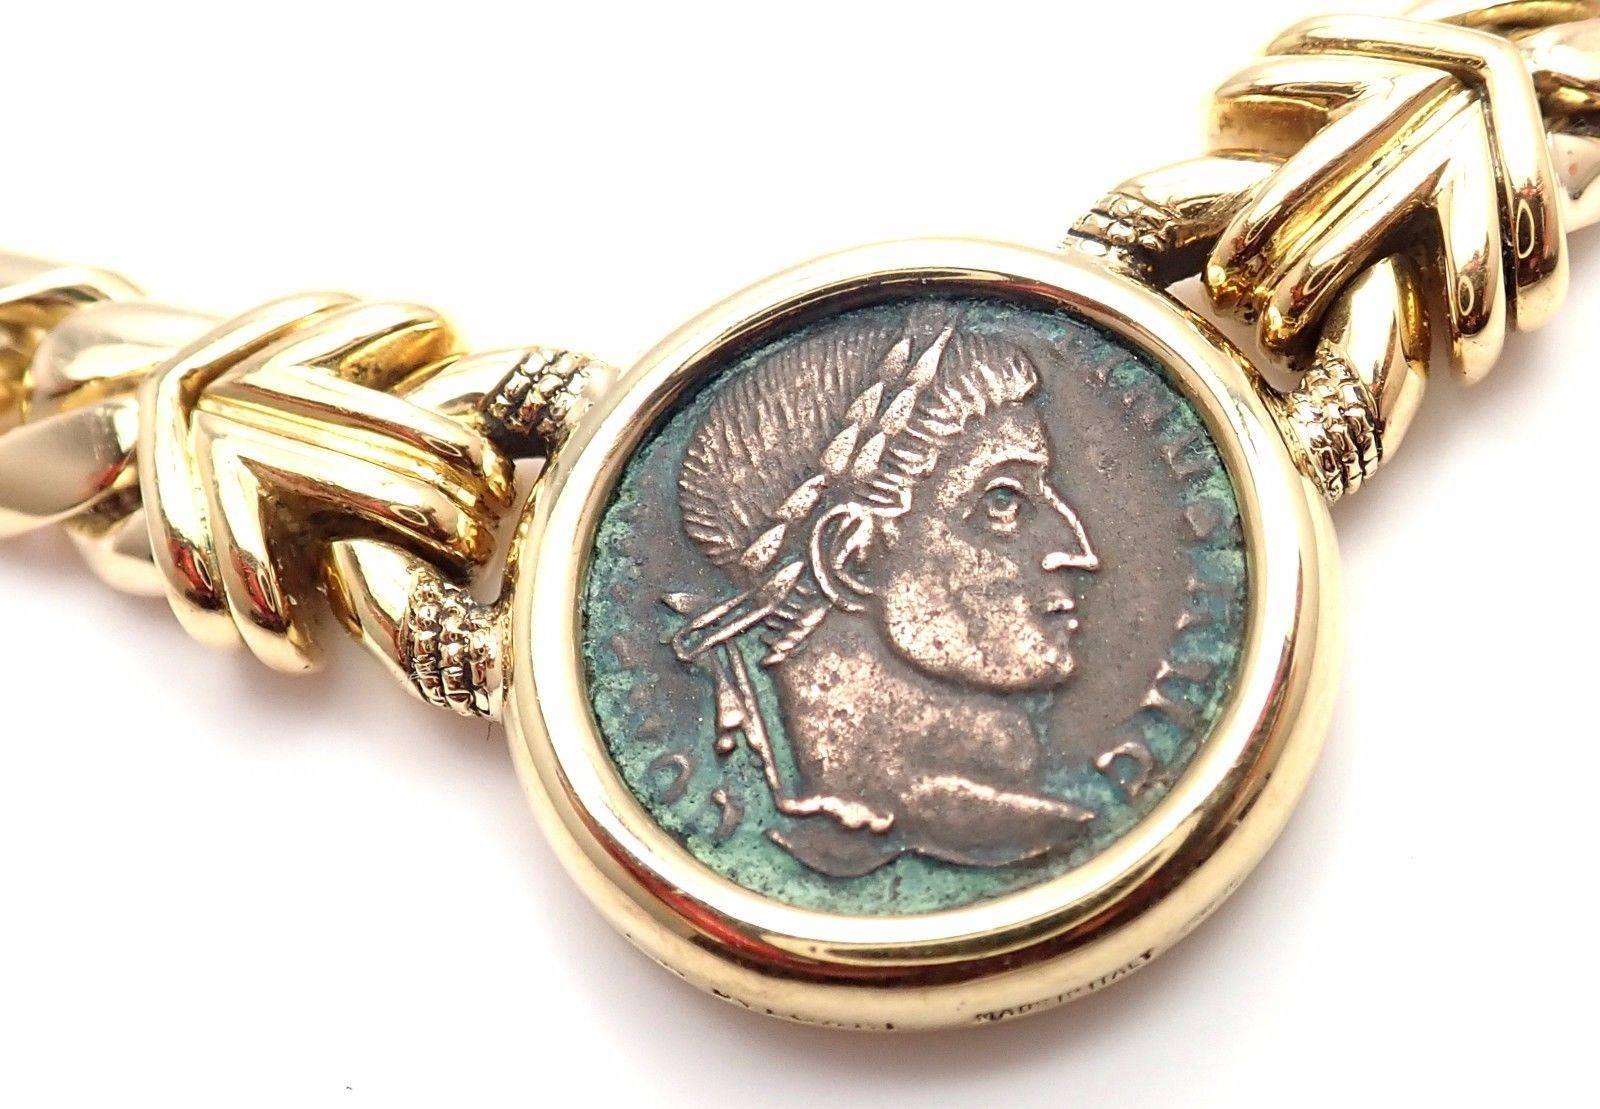 18k yellow gold ancient Roman coin, link chain necklace by Bulgari.
Measurements: 
Length: 16